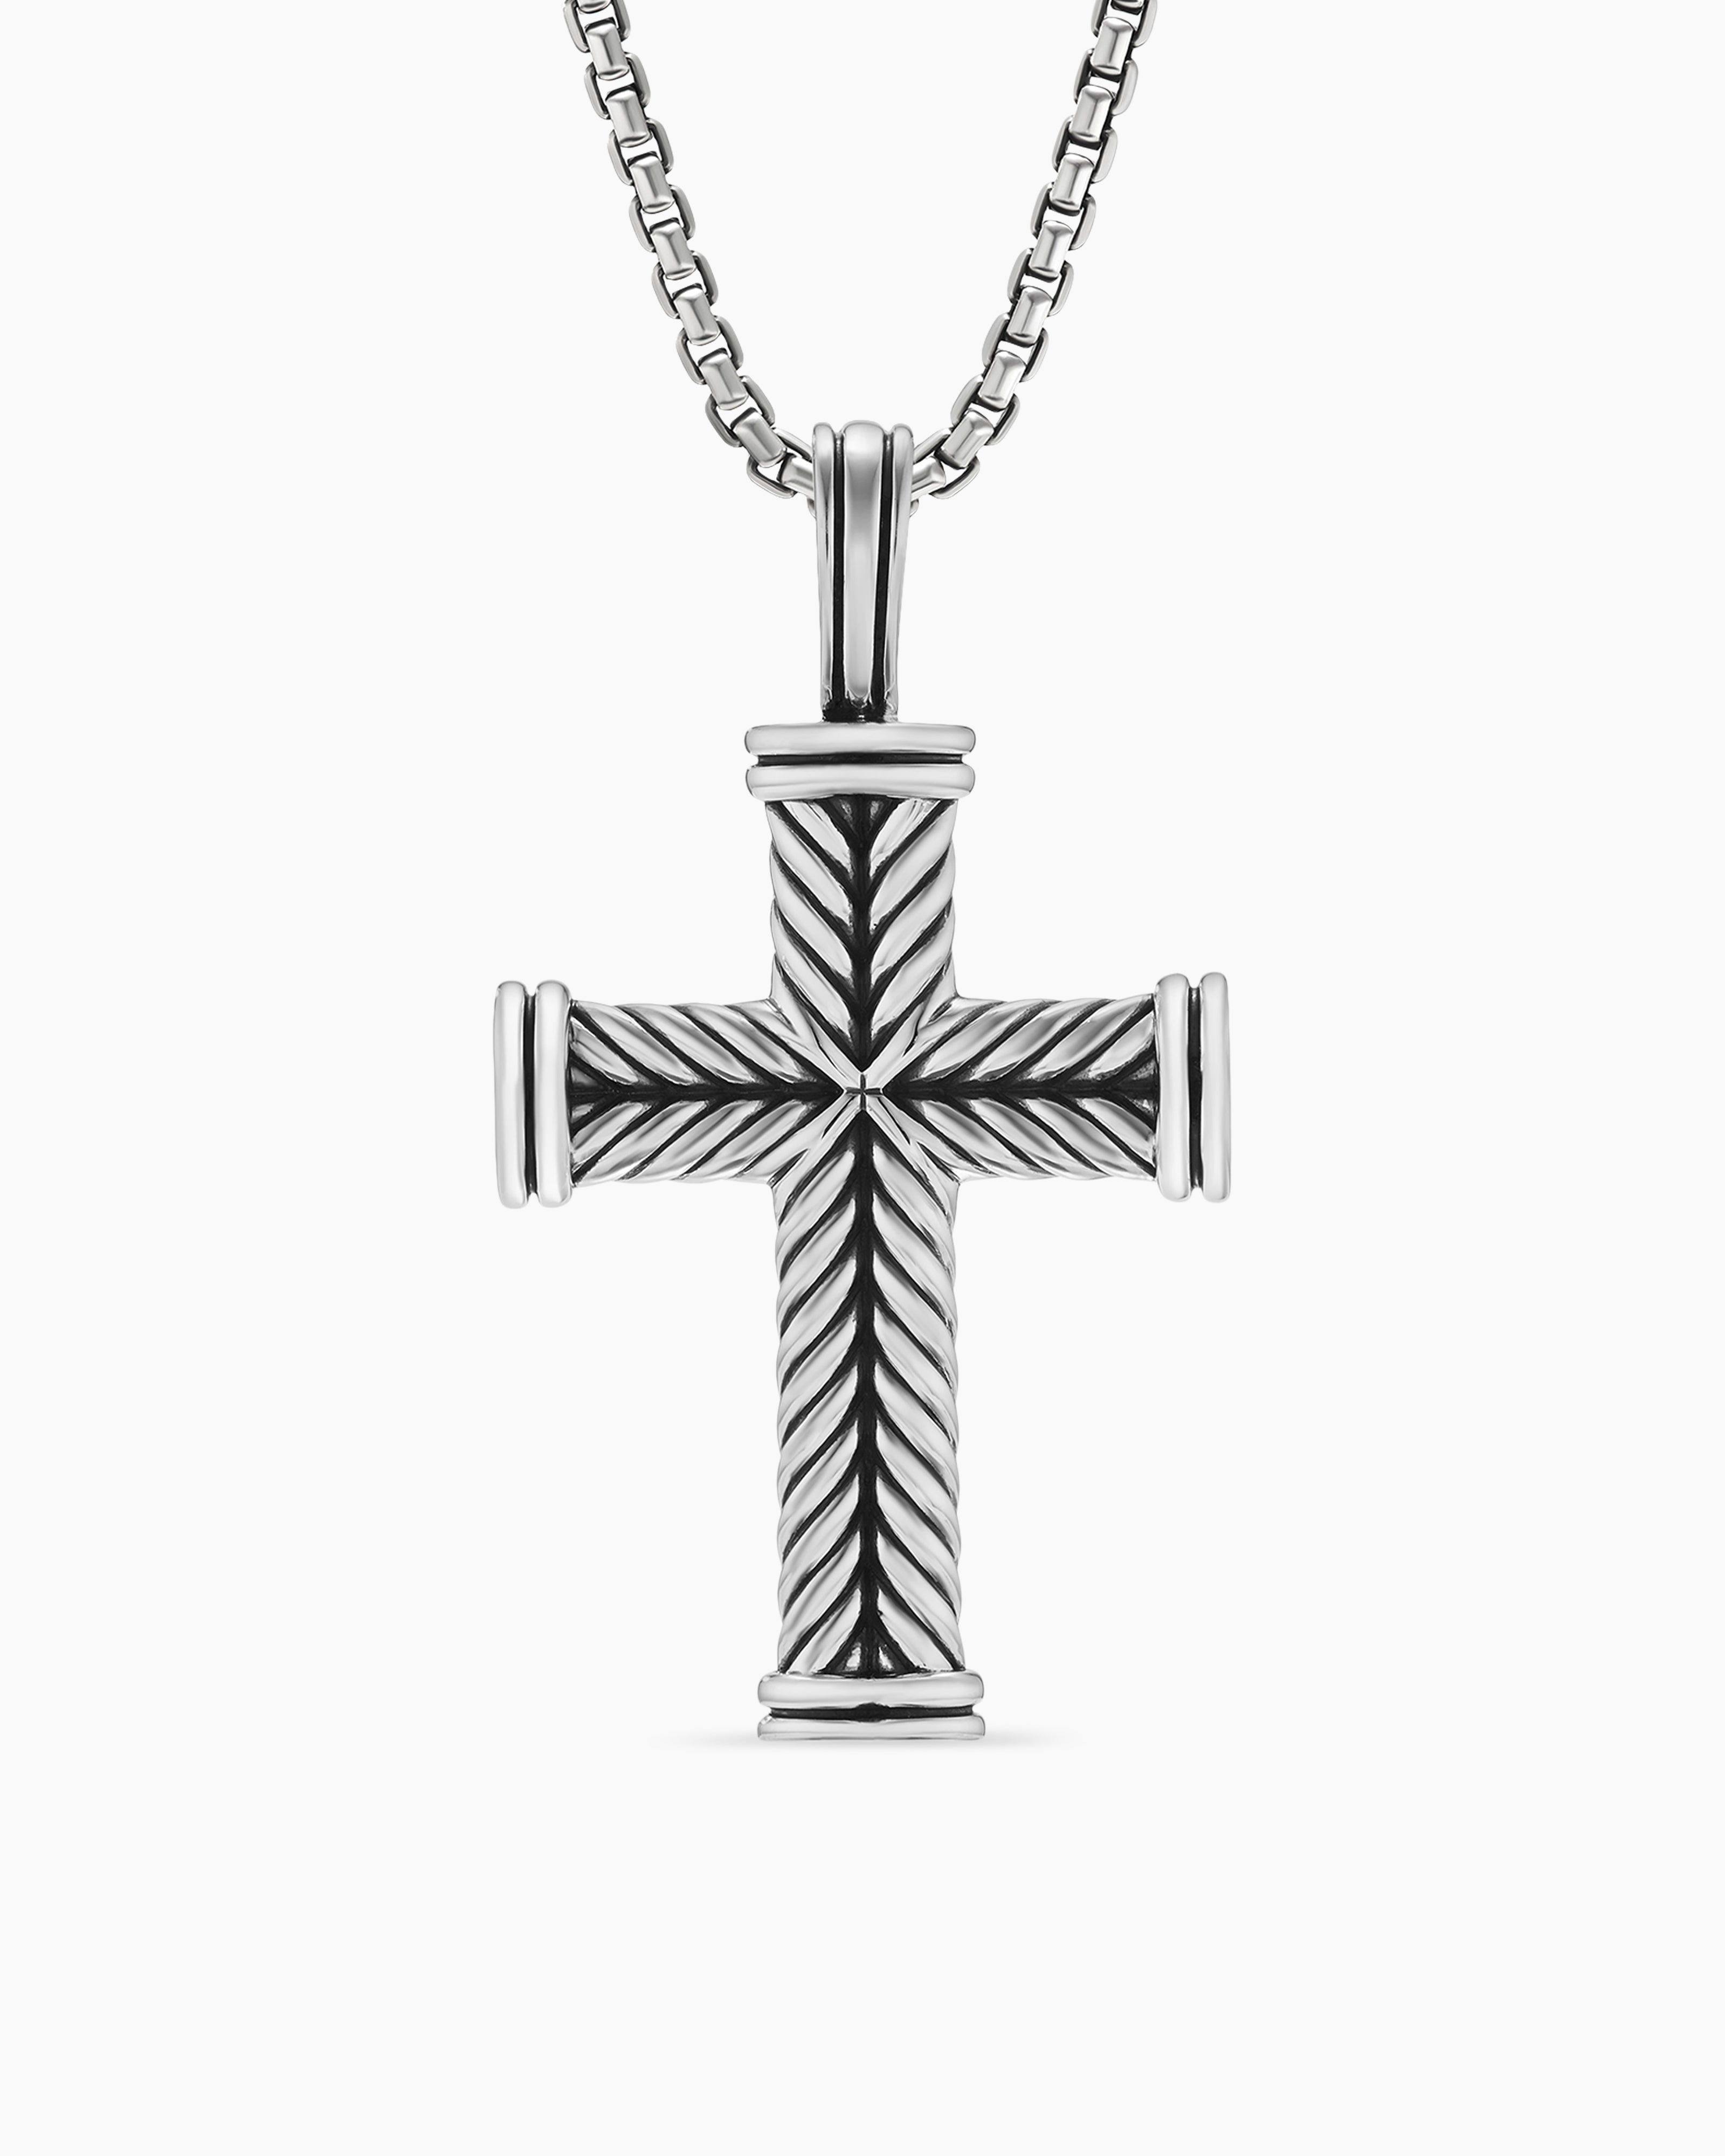 Petite X Cross Necklace in Sterling Silver with 14K Yellow Gold, 24mm | David  Yurman